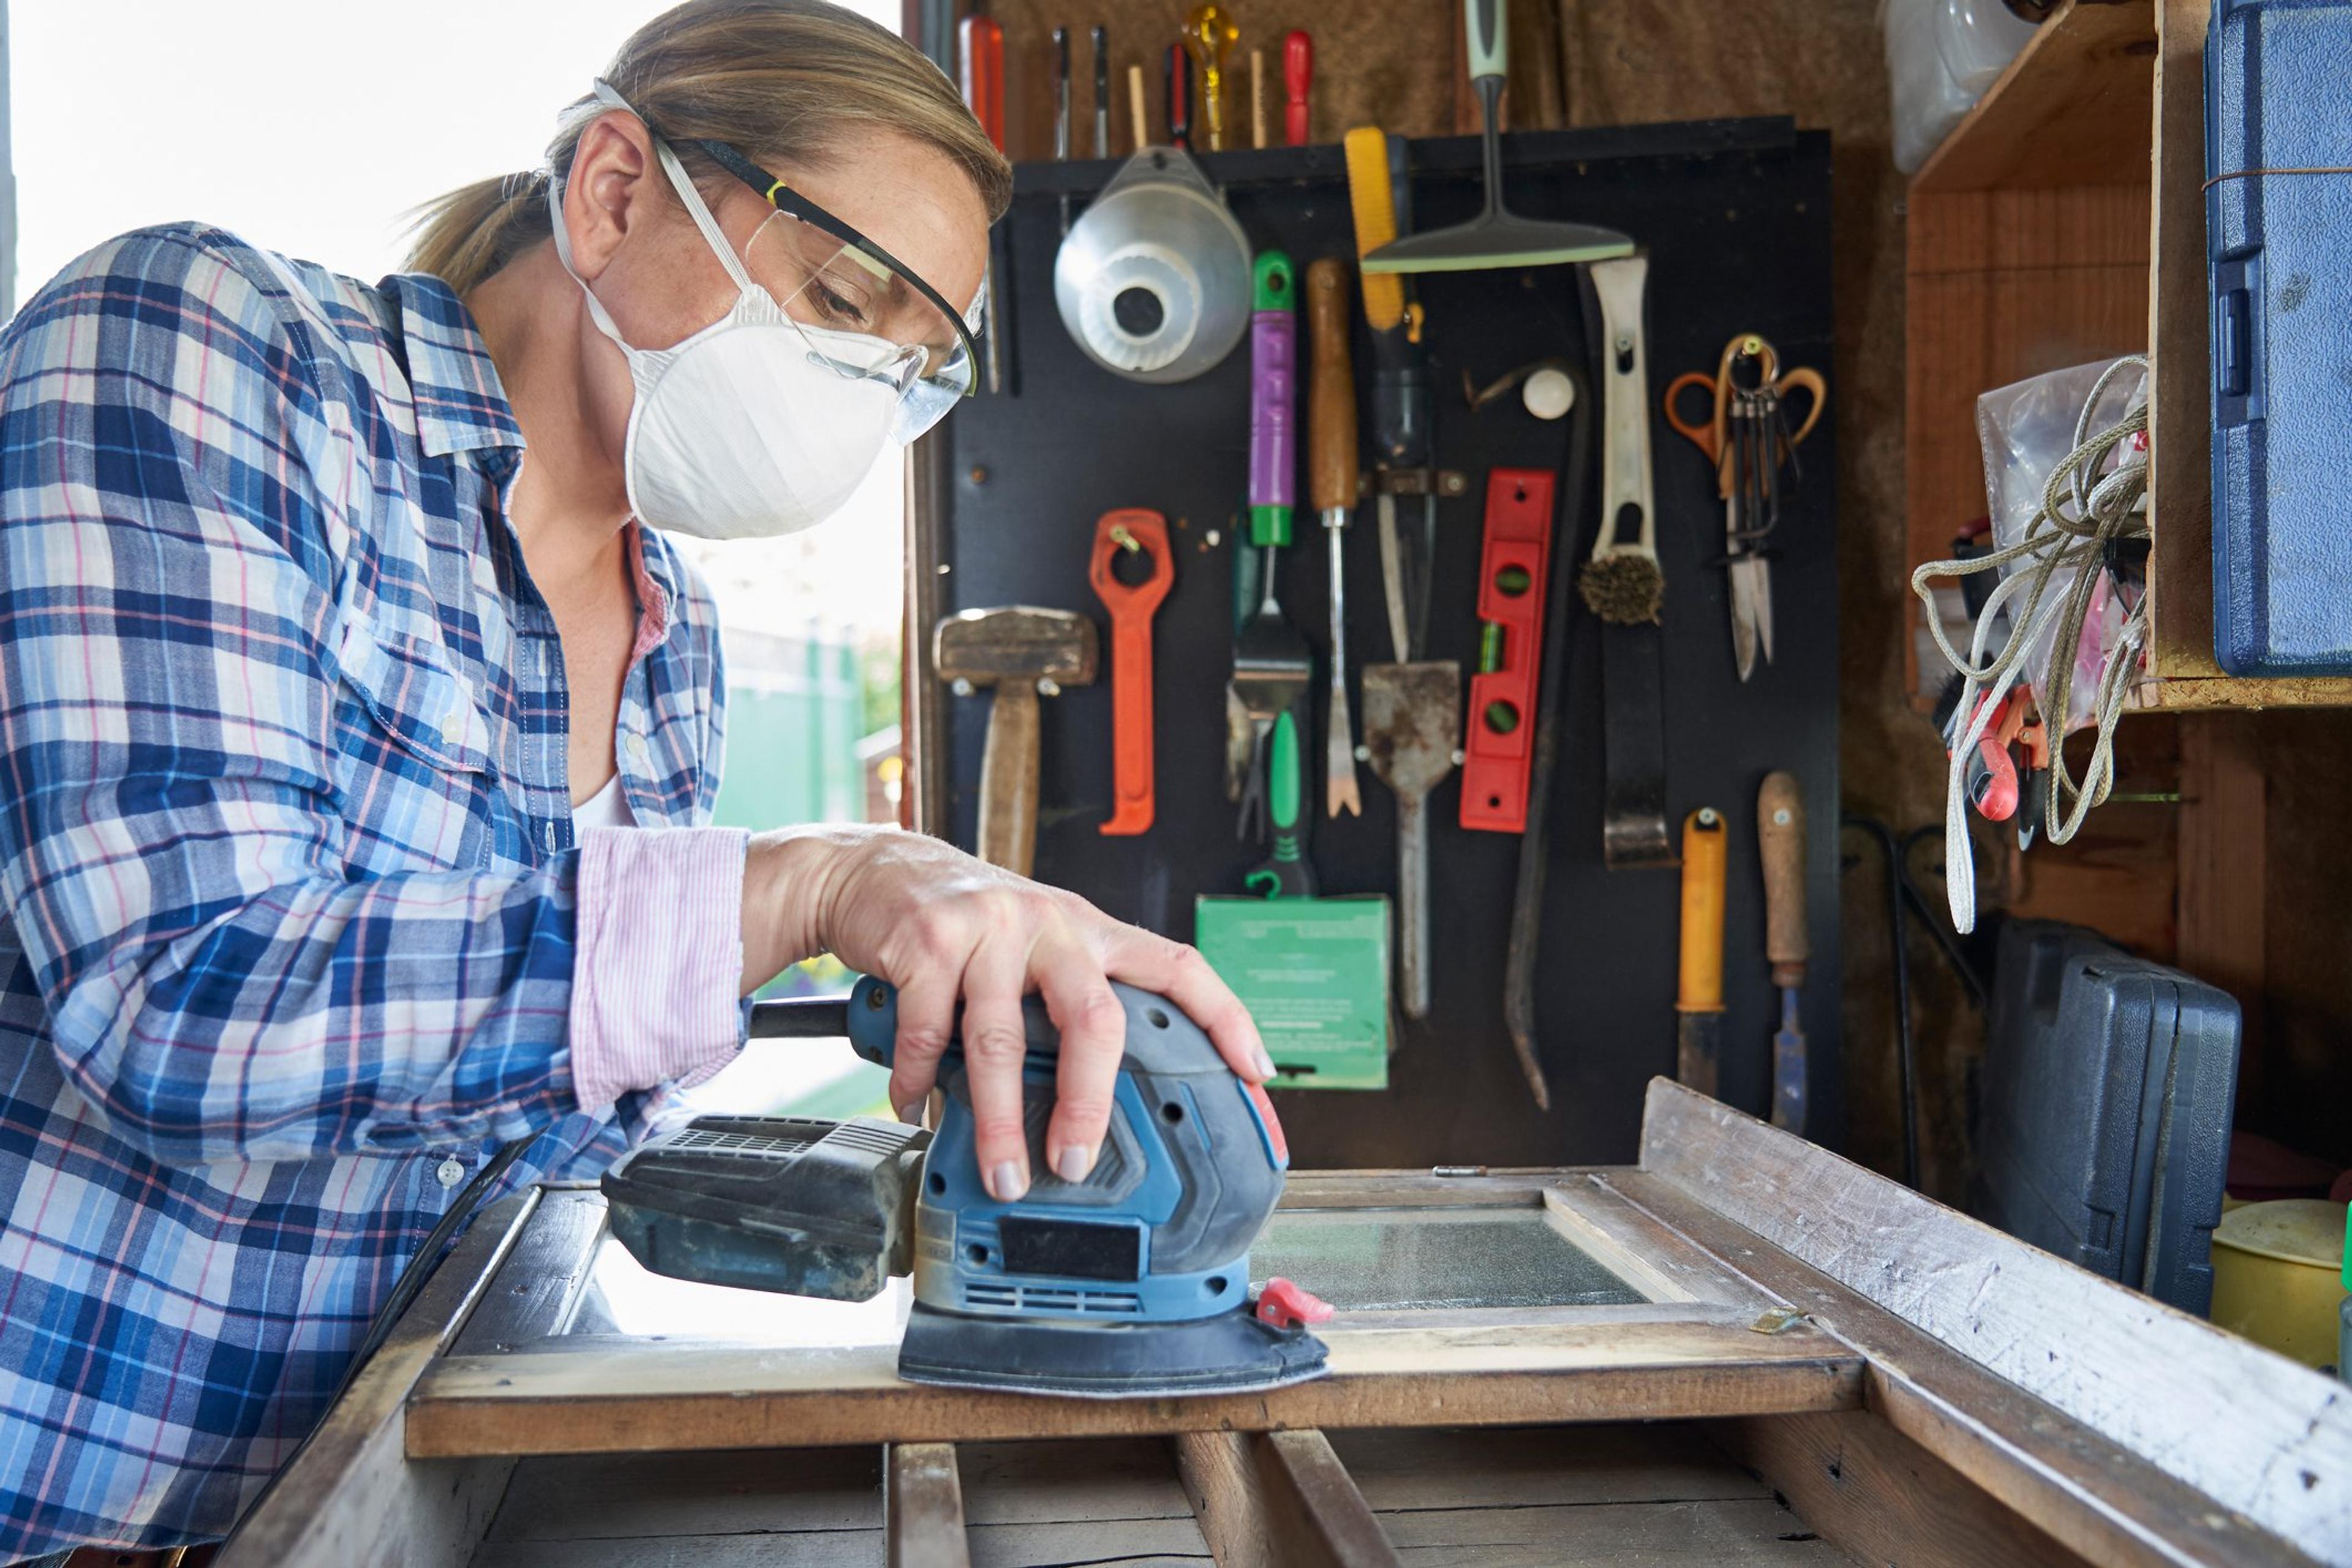 Woman wearing eye protection to avoid common eye injuries sands furniture in her workshop